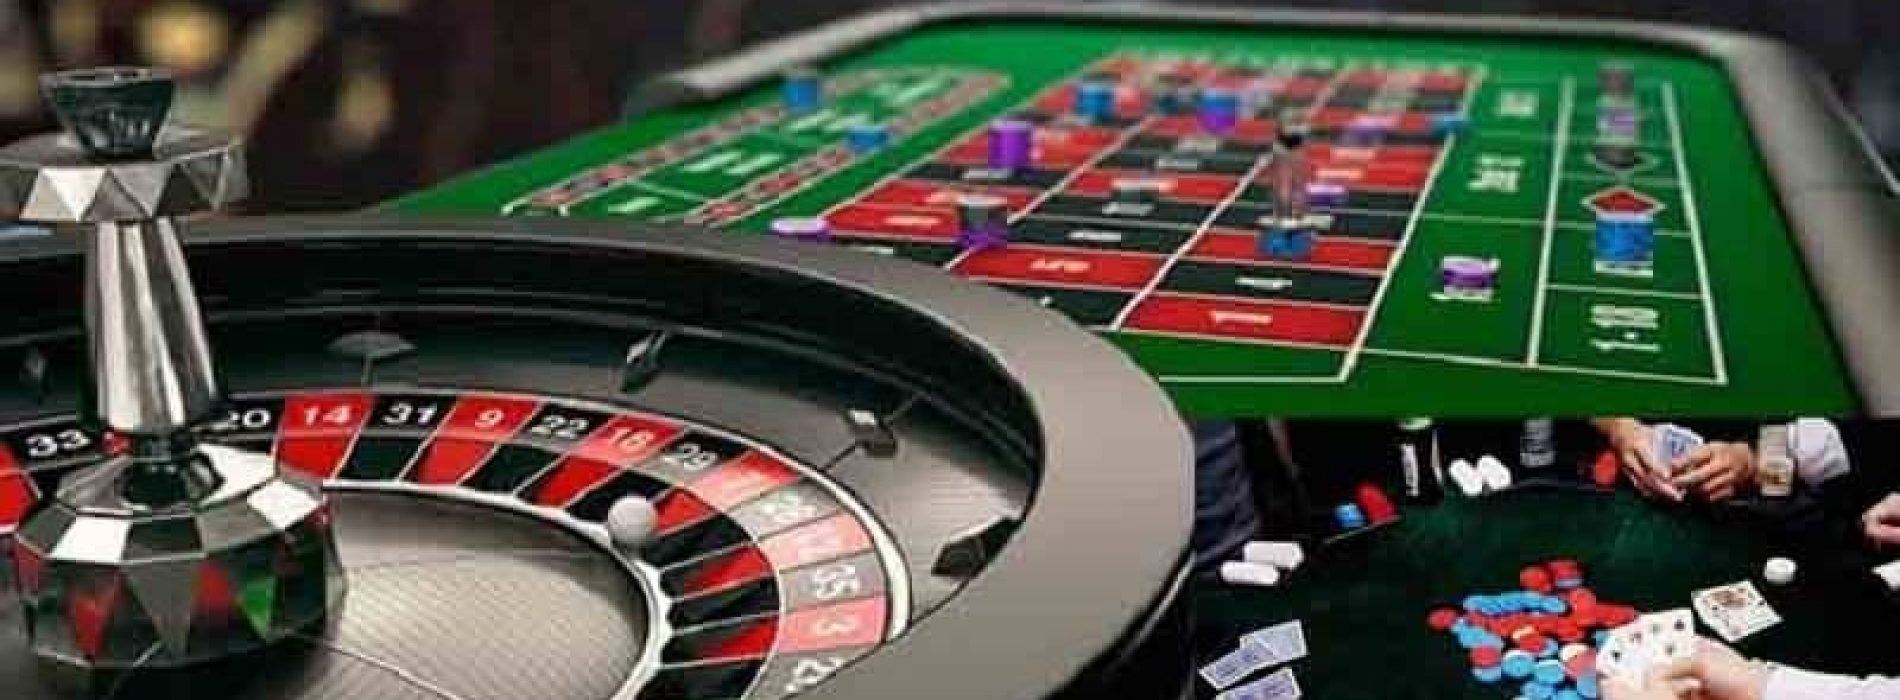 Few facts that will force to play poker online instead of going to land-based casinos